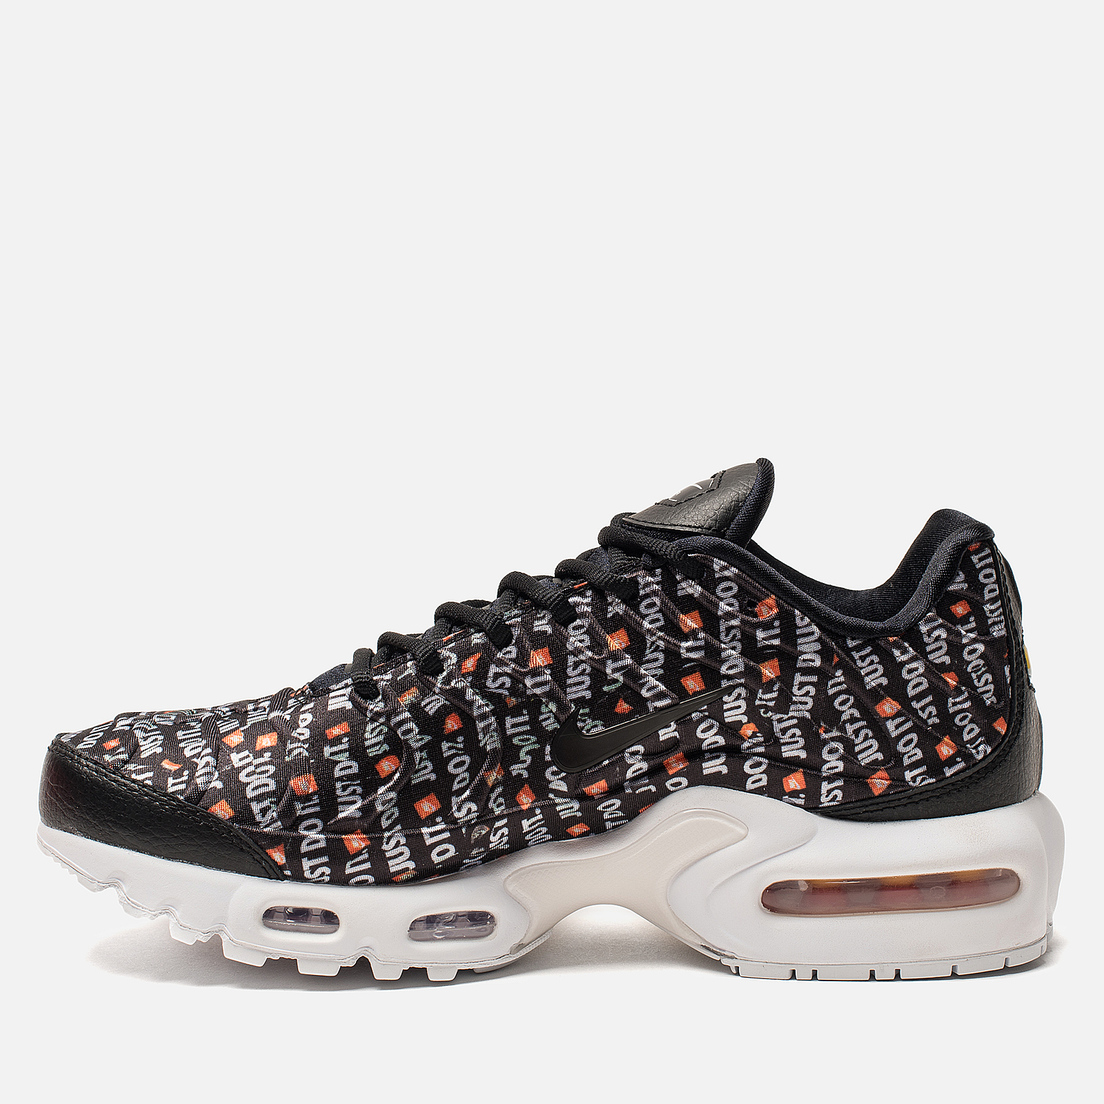 Nike Air Max Plus SE Just Do It 862201-007